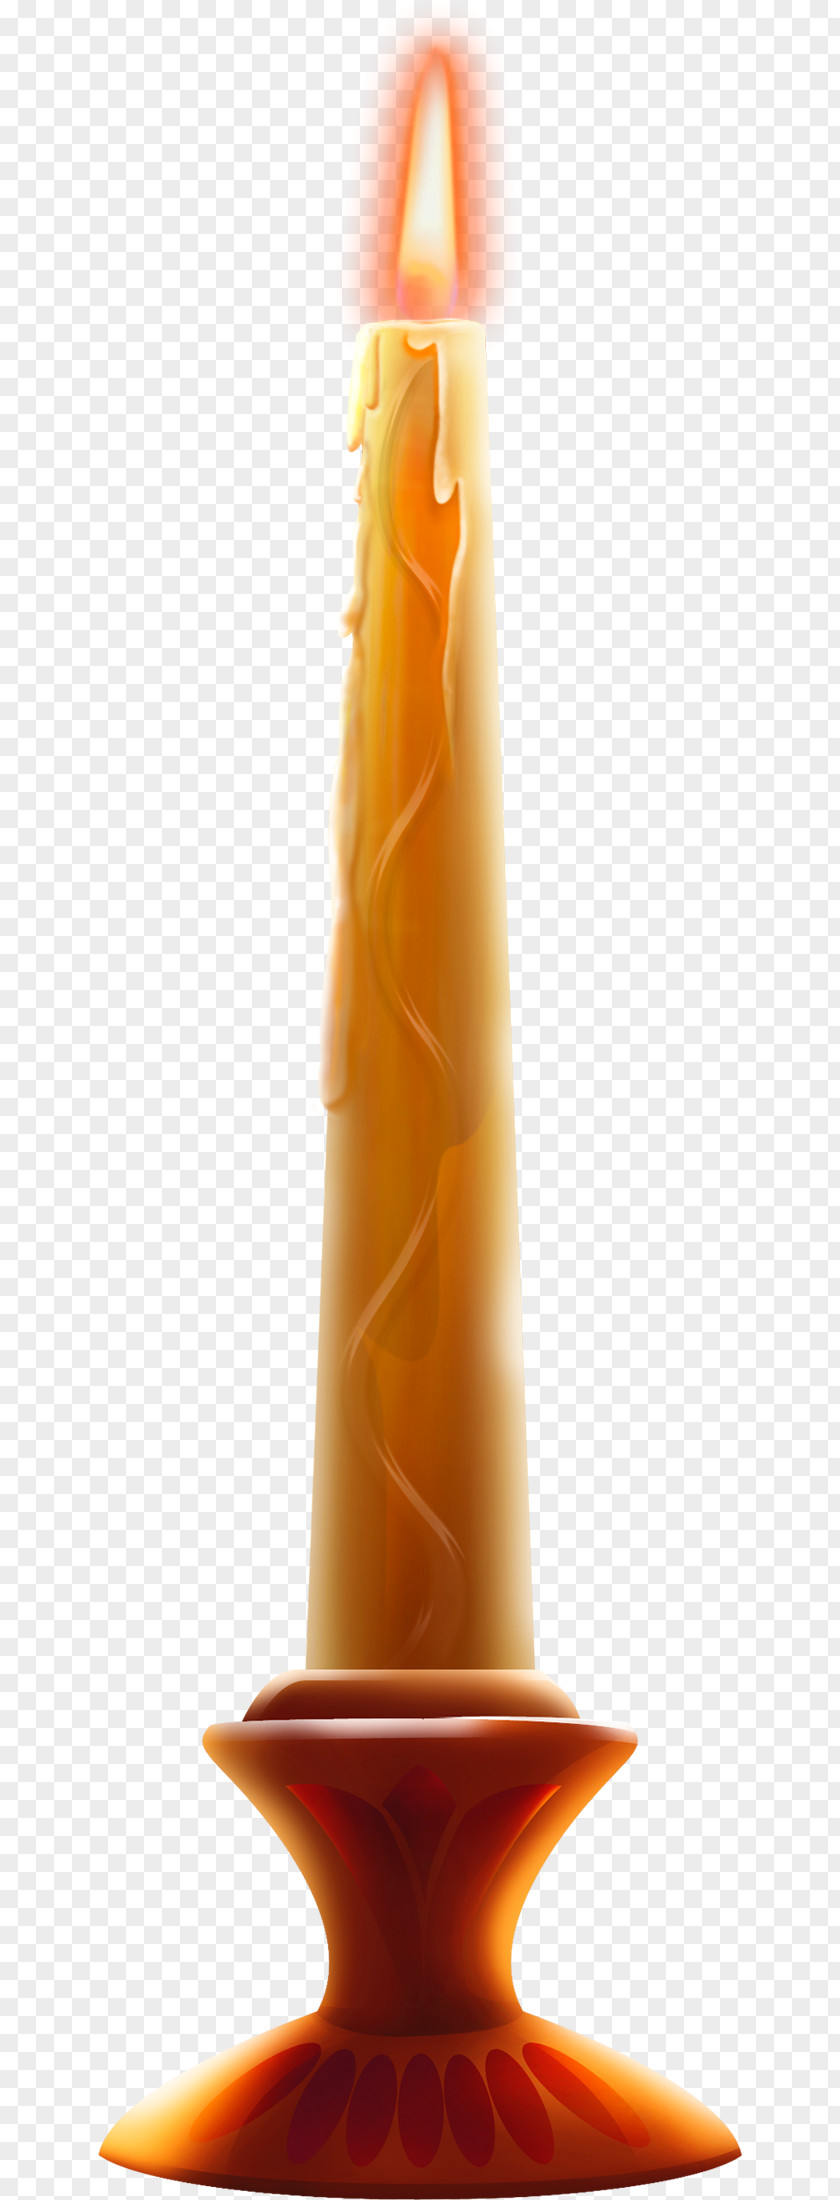 Candle Image Euclidean Vector PNG